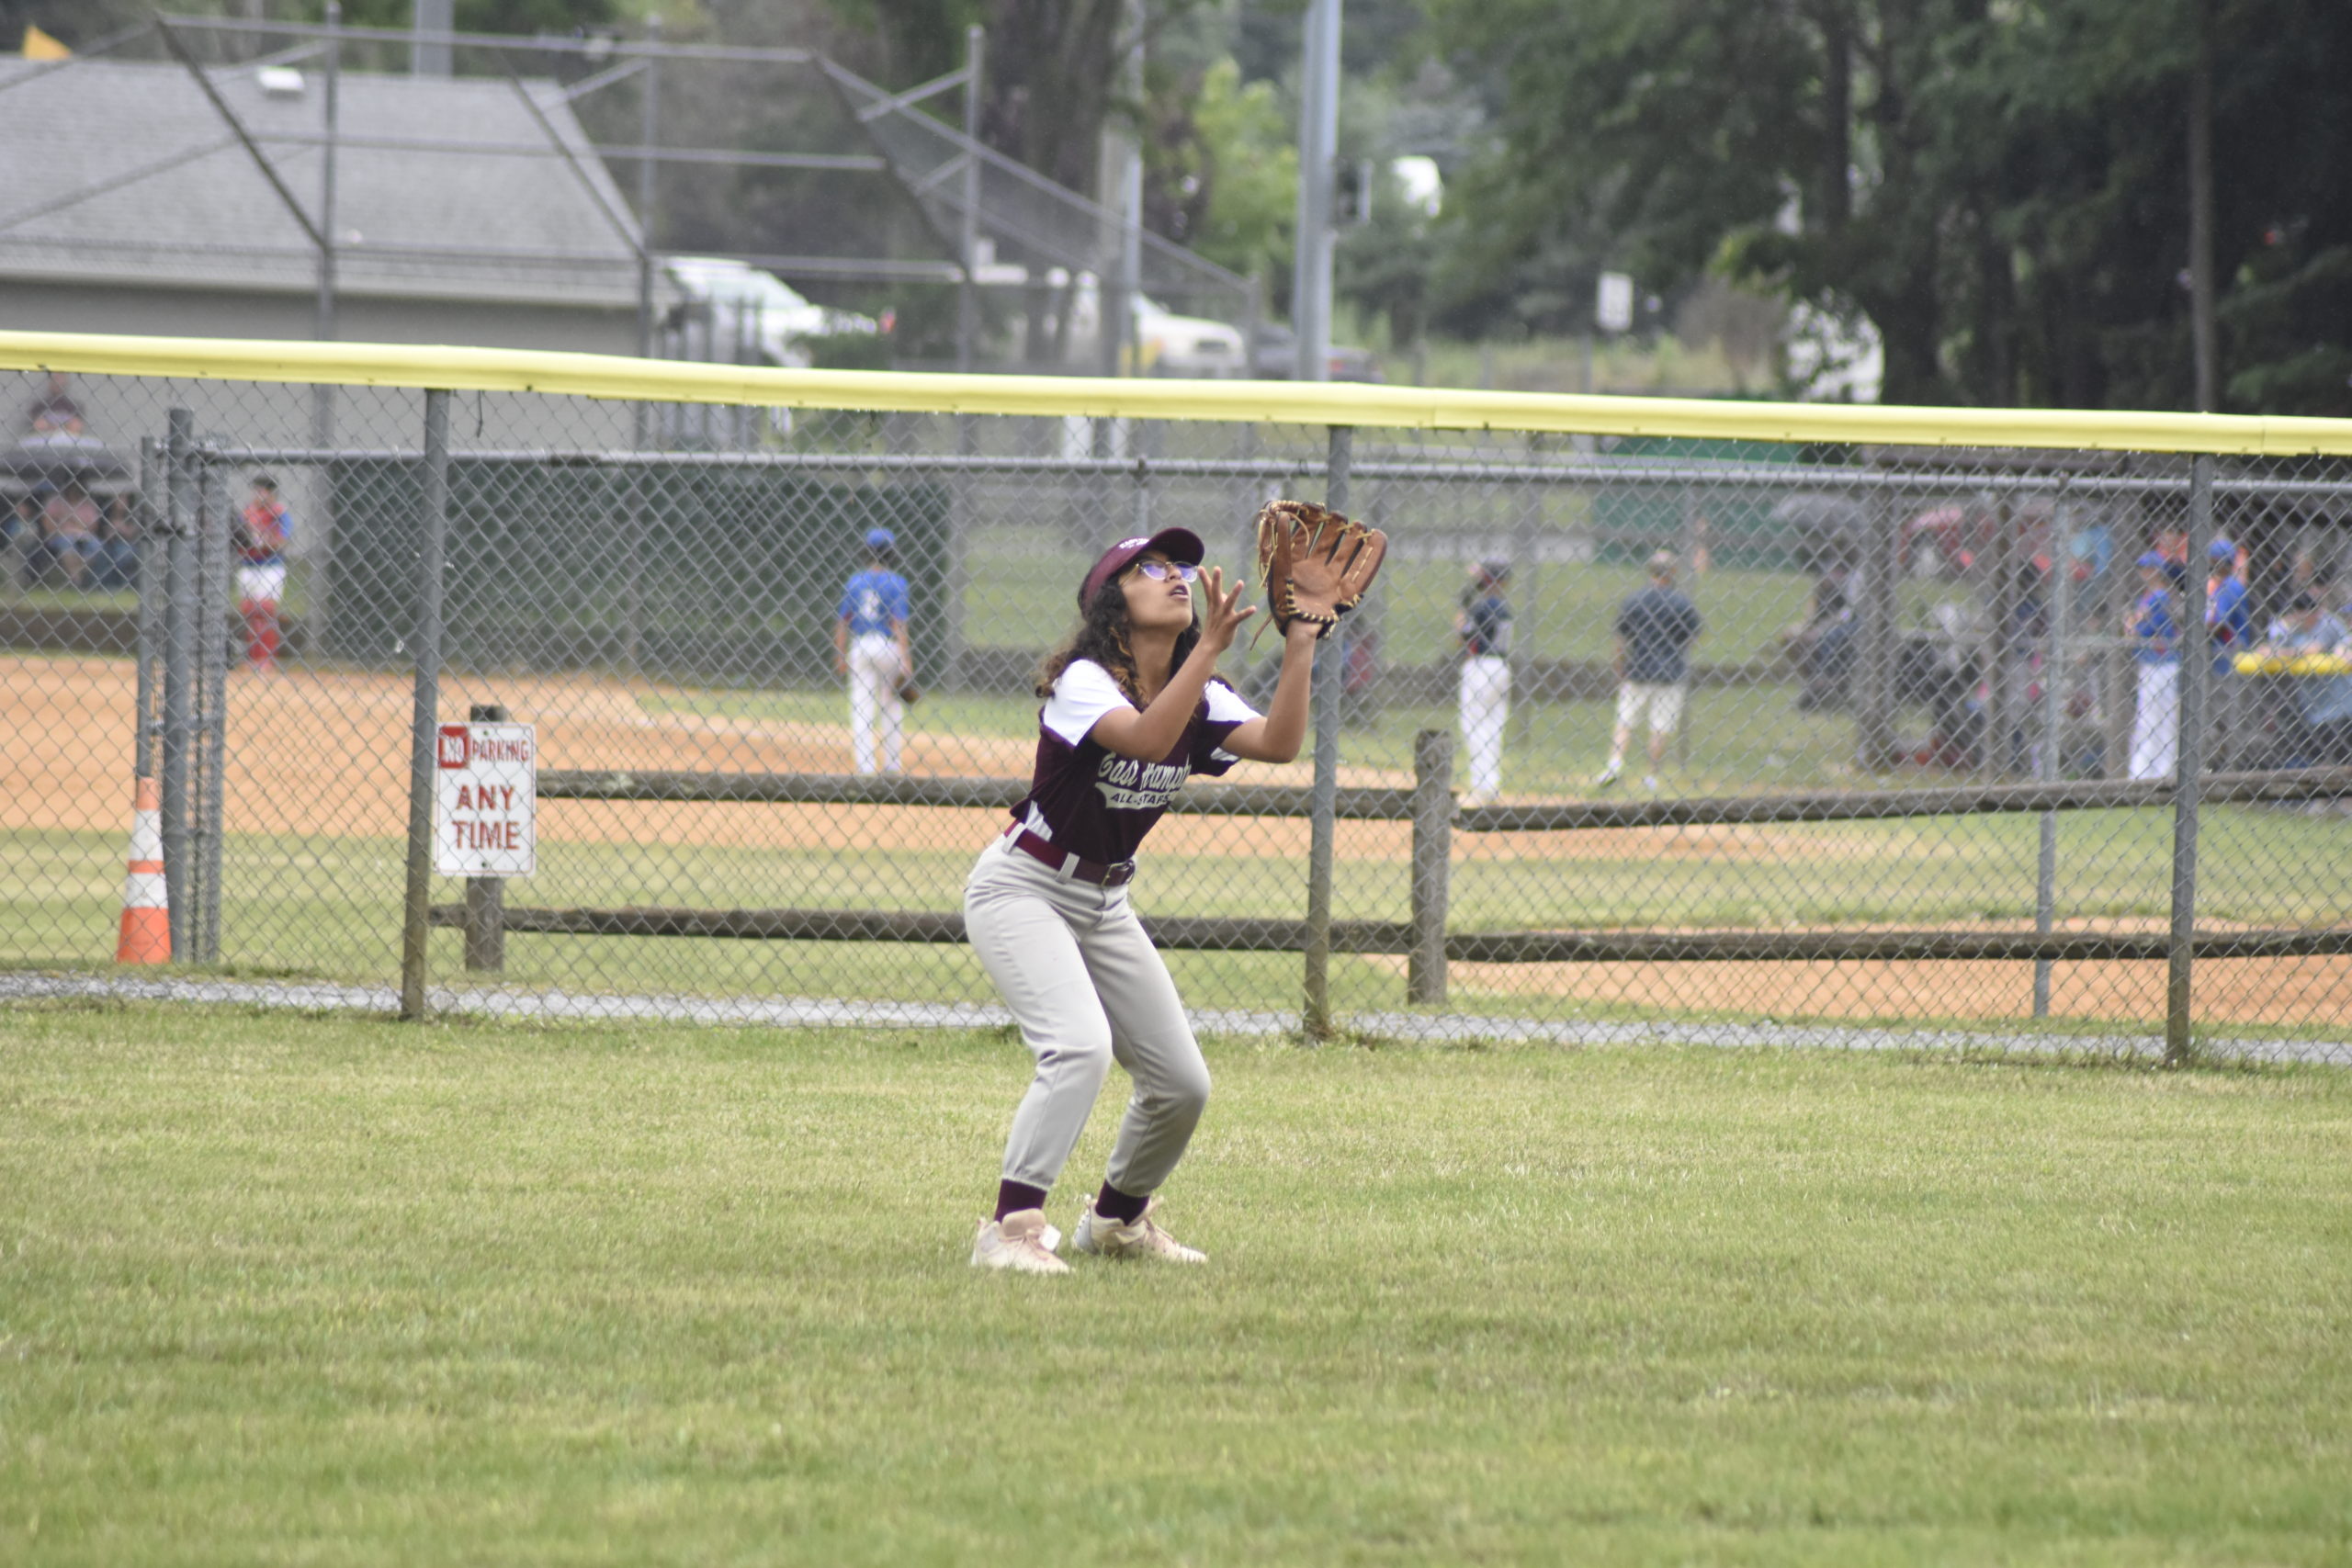 East Hampton centerfielder Emily Hurtado lines up a fly ball and makes the final out to keep North Shore off the scoreboard in the bottom of the first inning.